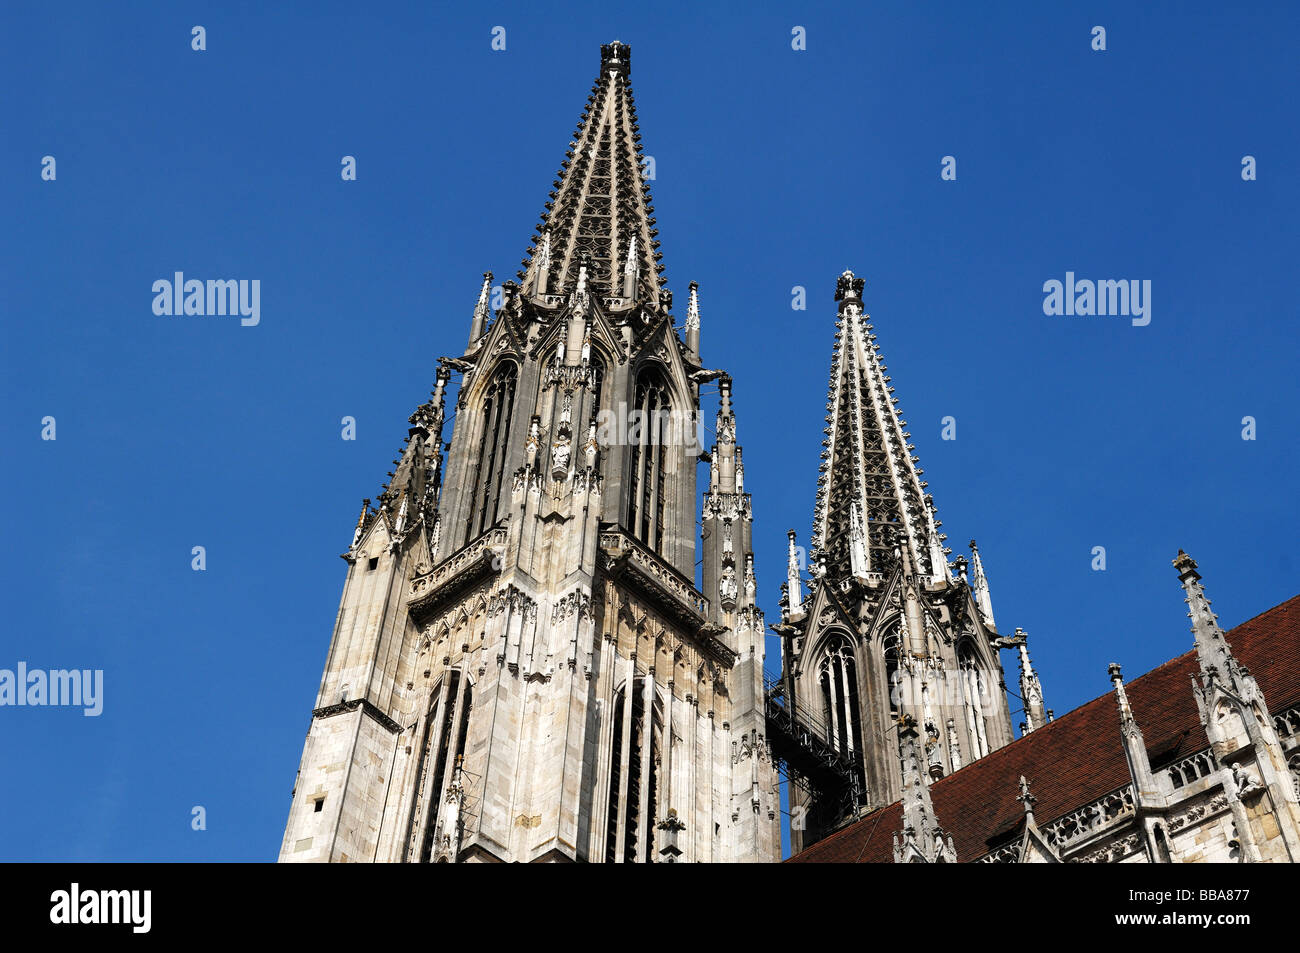 Gothic towers of St. Peter's Cathedral against a blue sky, Regensburg, Lower Bavaria, Germany, Europe Stock Photo